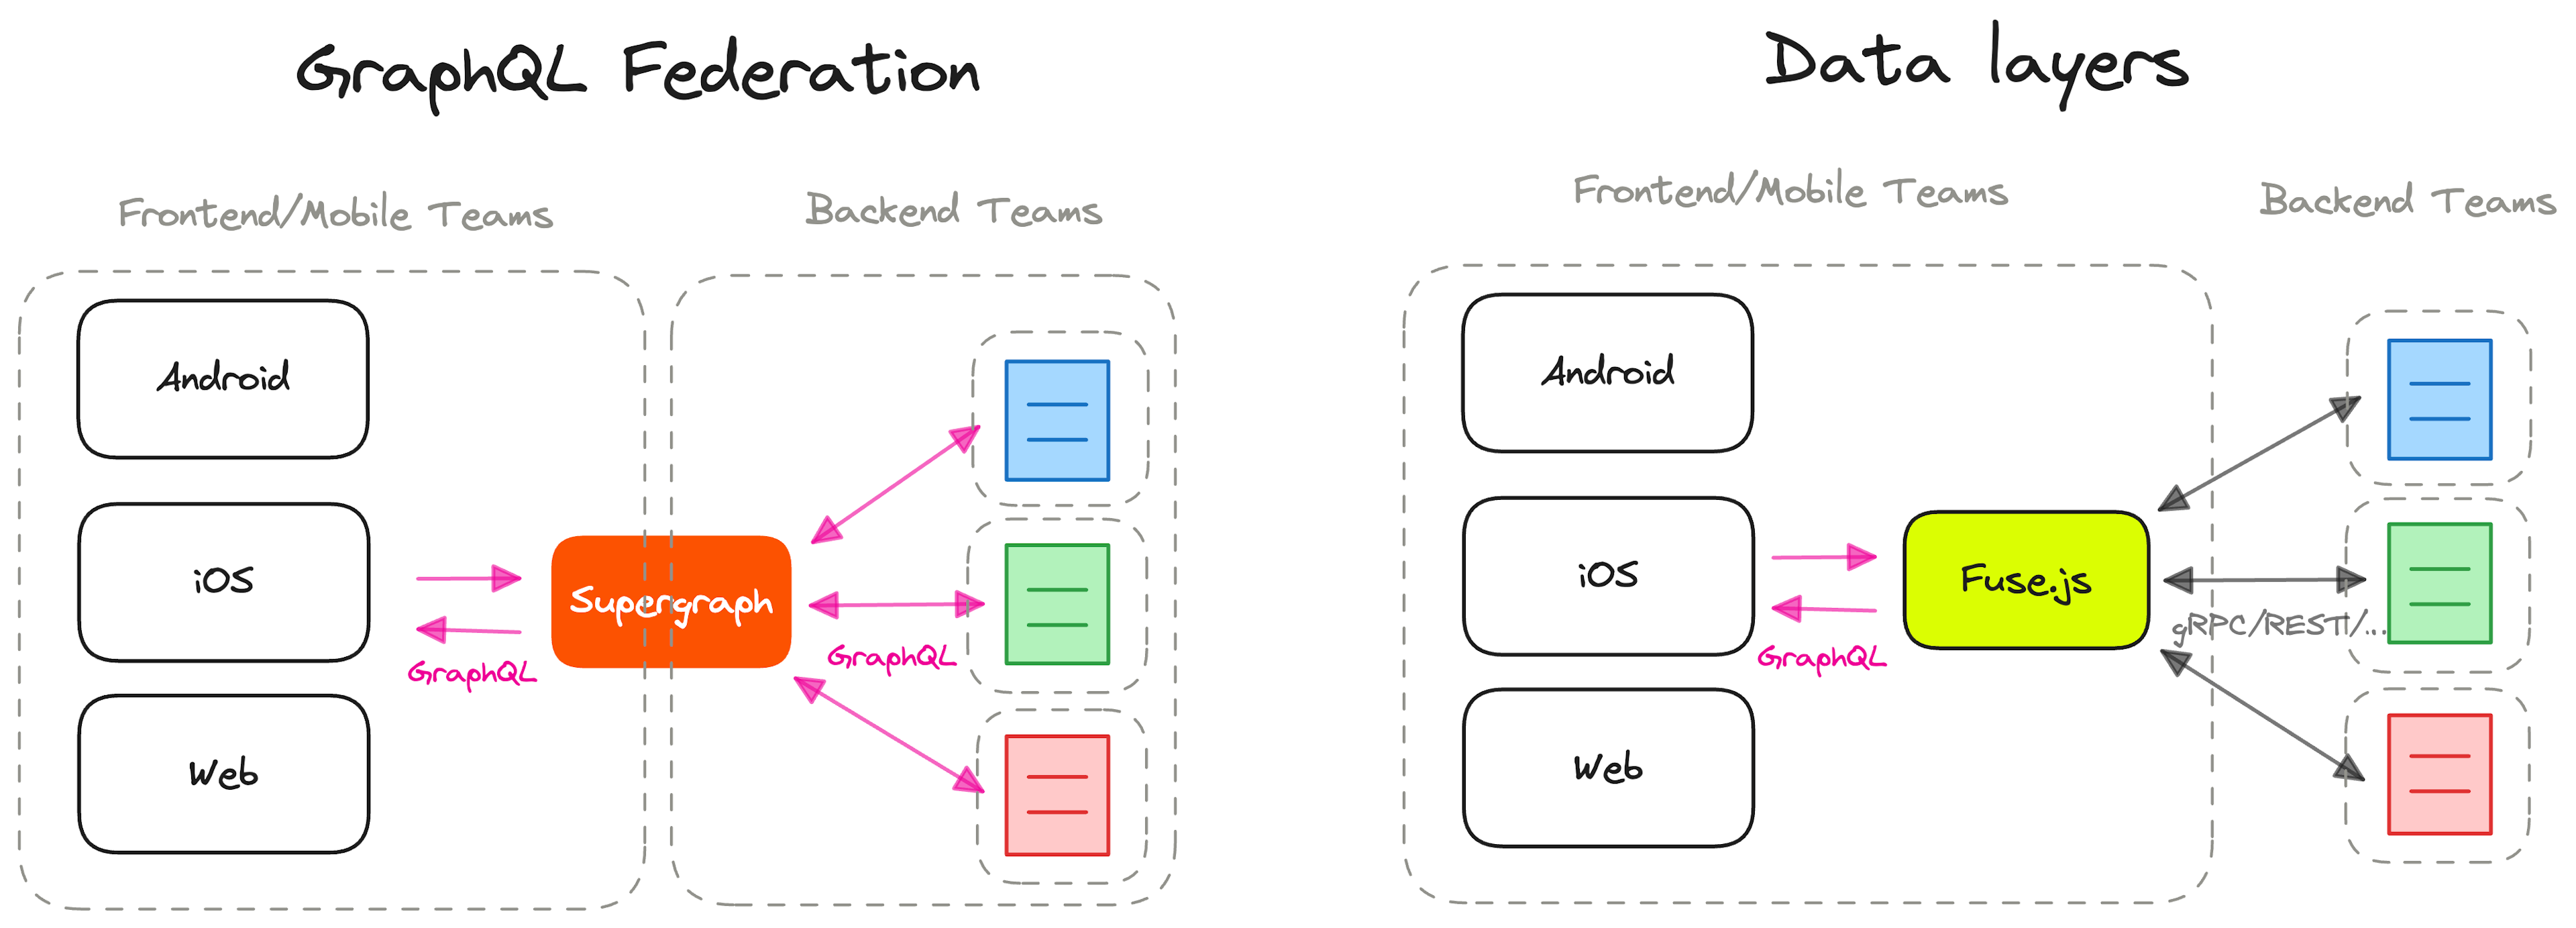 This shows on the left the classic workflow where we have boxes representing 'mobile', 'iOS' and 'web' development teams. In the middle we see a square called supergraph which connects to the backend teams over GraphQL, the important detail here being that all communication hapepens over GraphQL. On the right we see the fuse diagram where all frontend teams connect over GraphQL but the backend datasources connected by fuse are free to use their own protocol